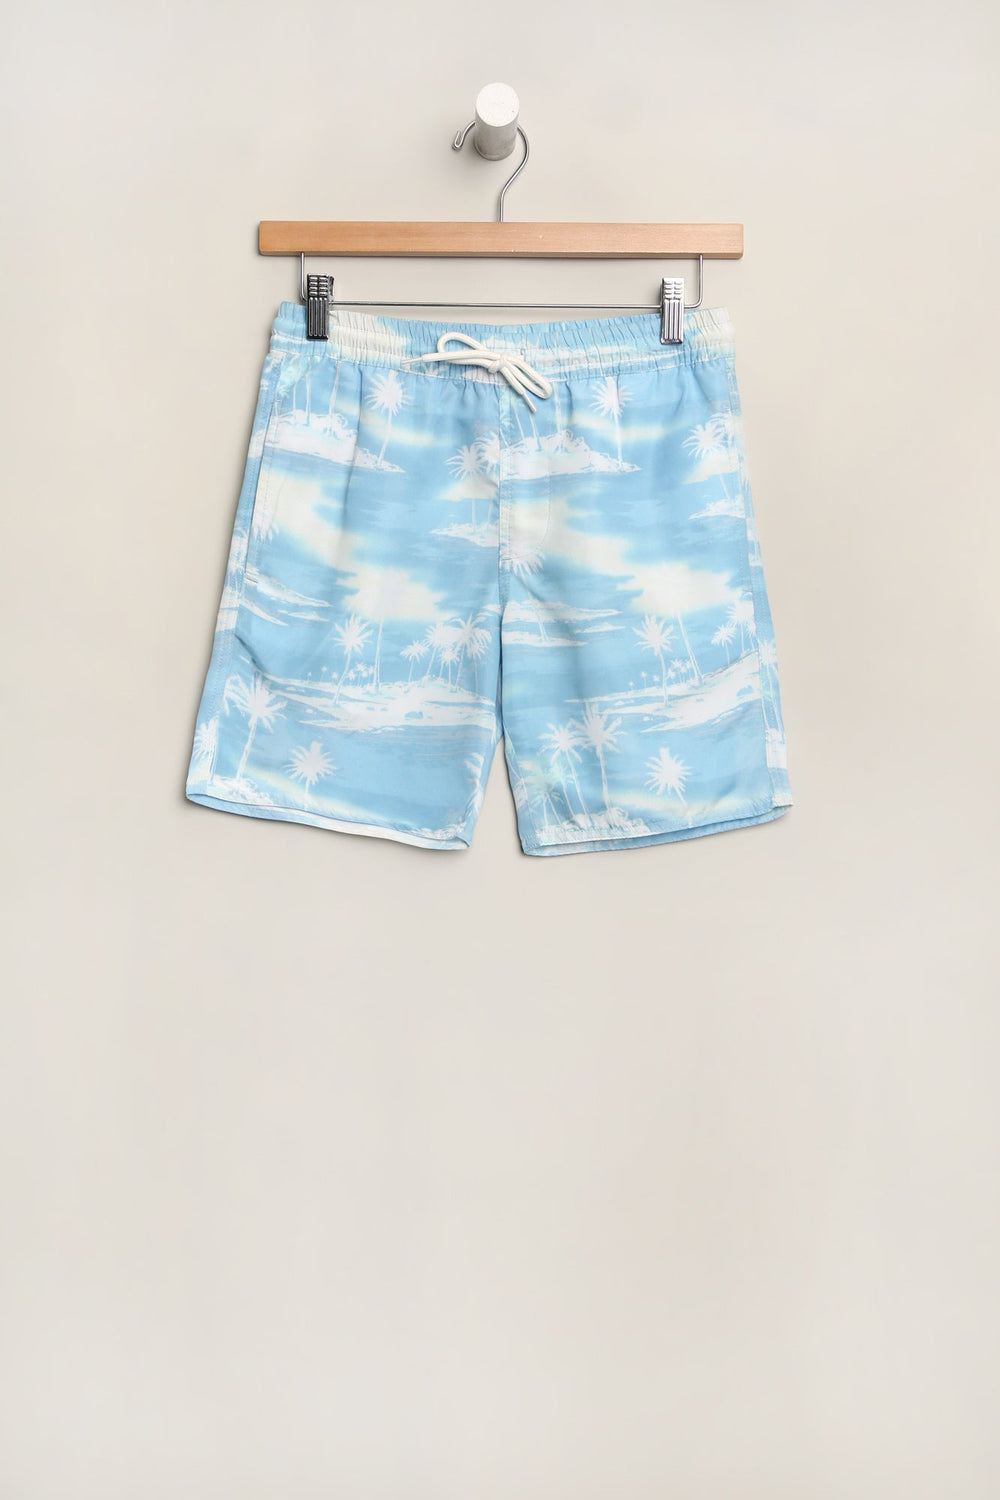 West49 Youth Printed Beach Shorts West49 Youth Printed Beach Shorts